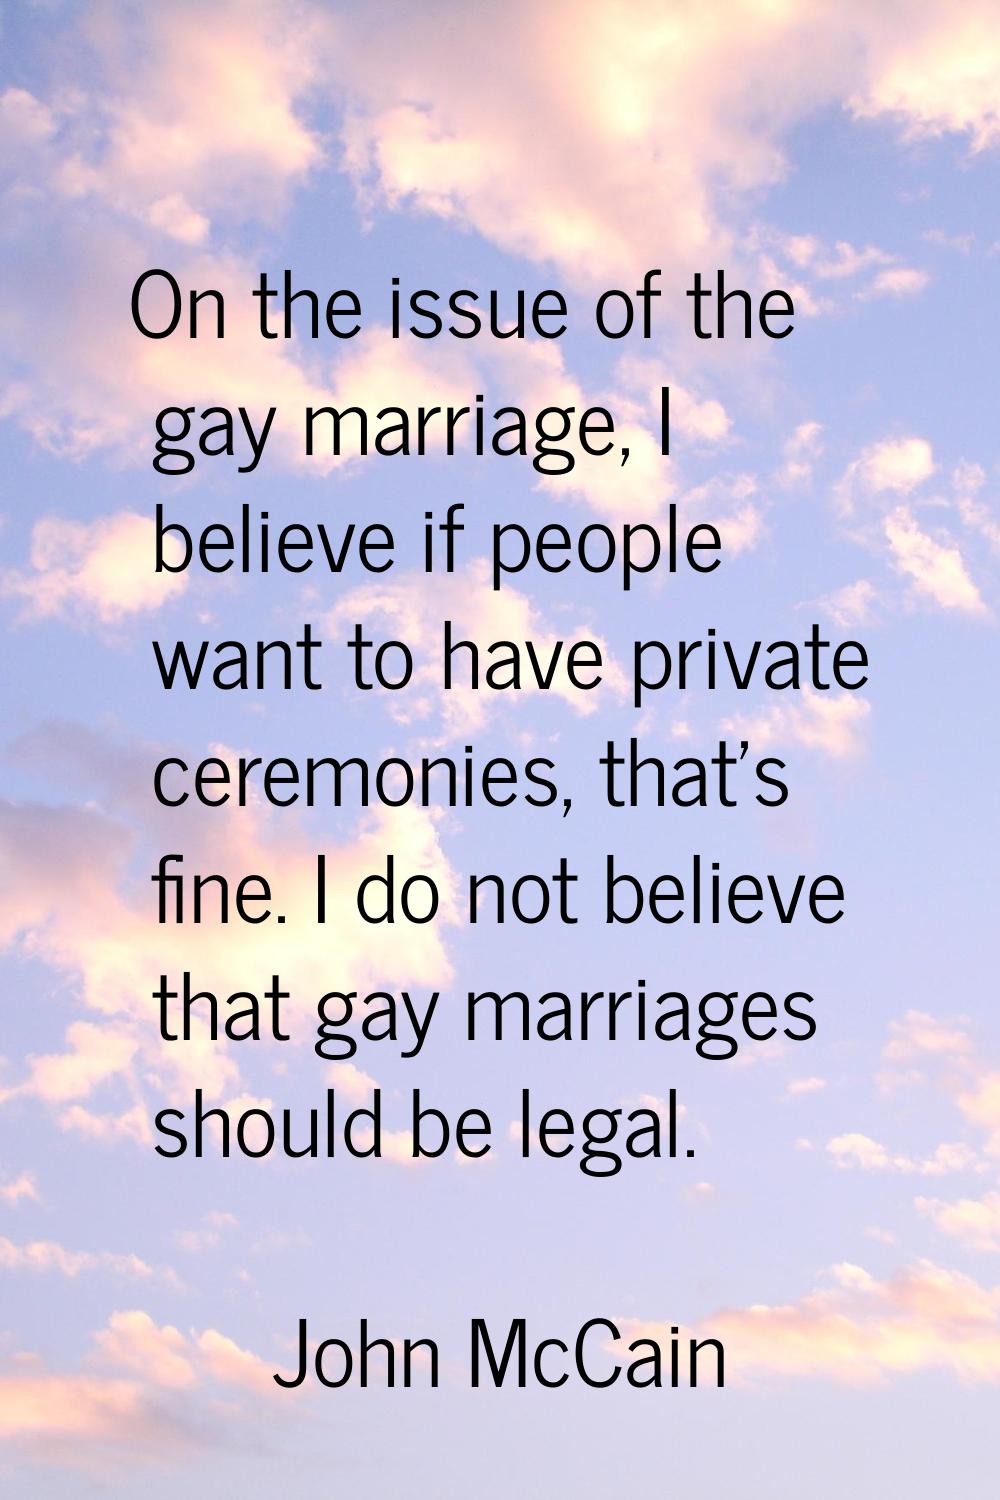 On the issue of the gay marriage, I believe if people want to have private ceremonies, that's fine.